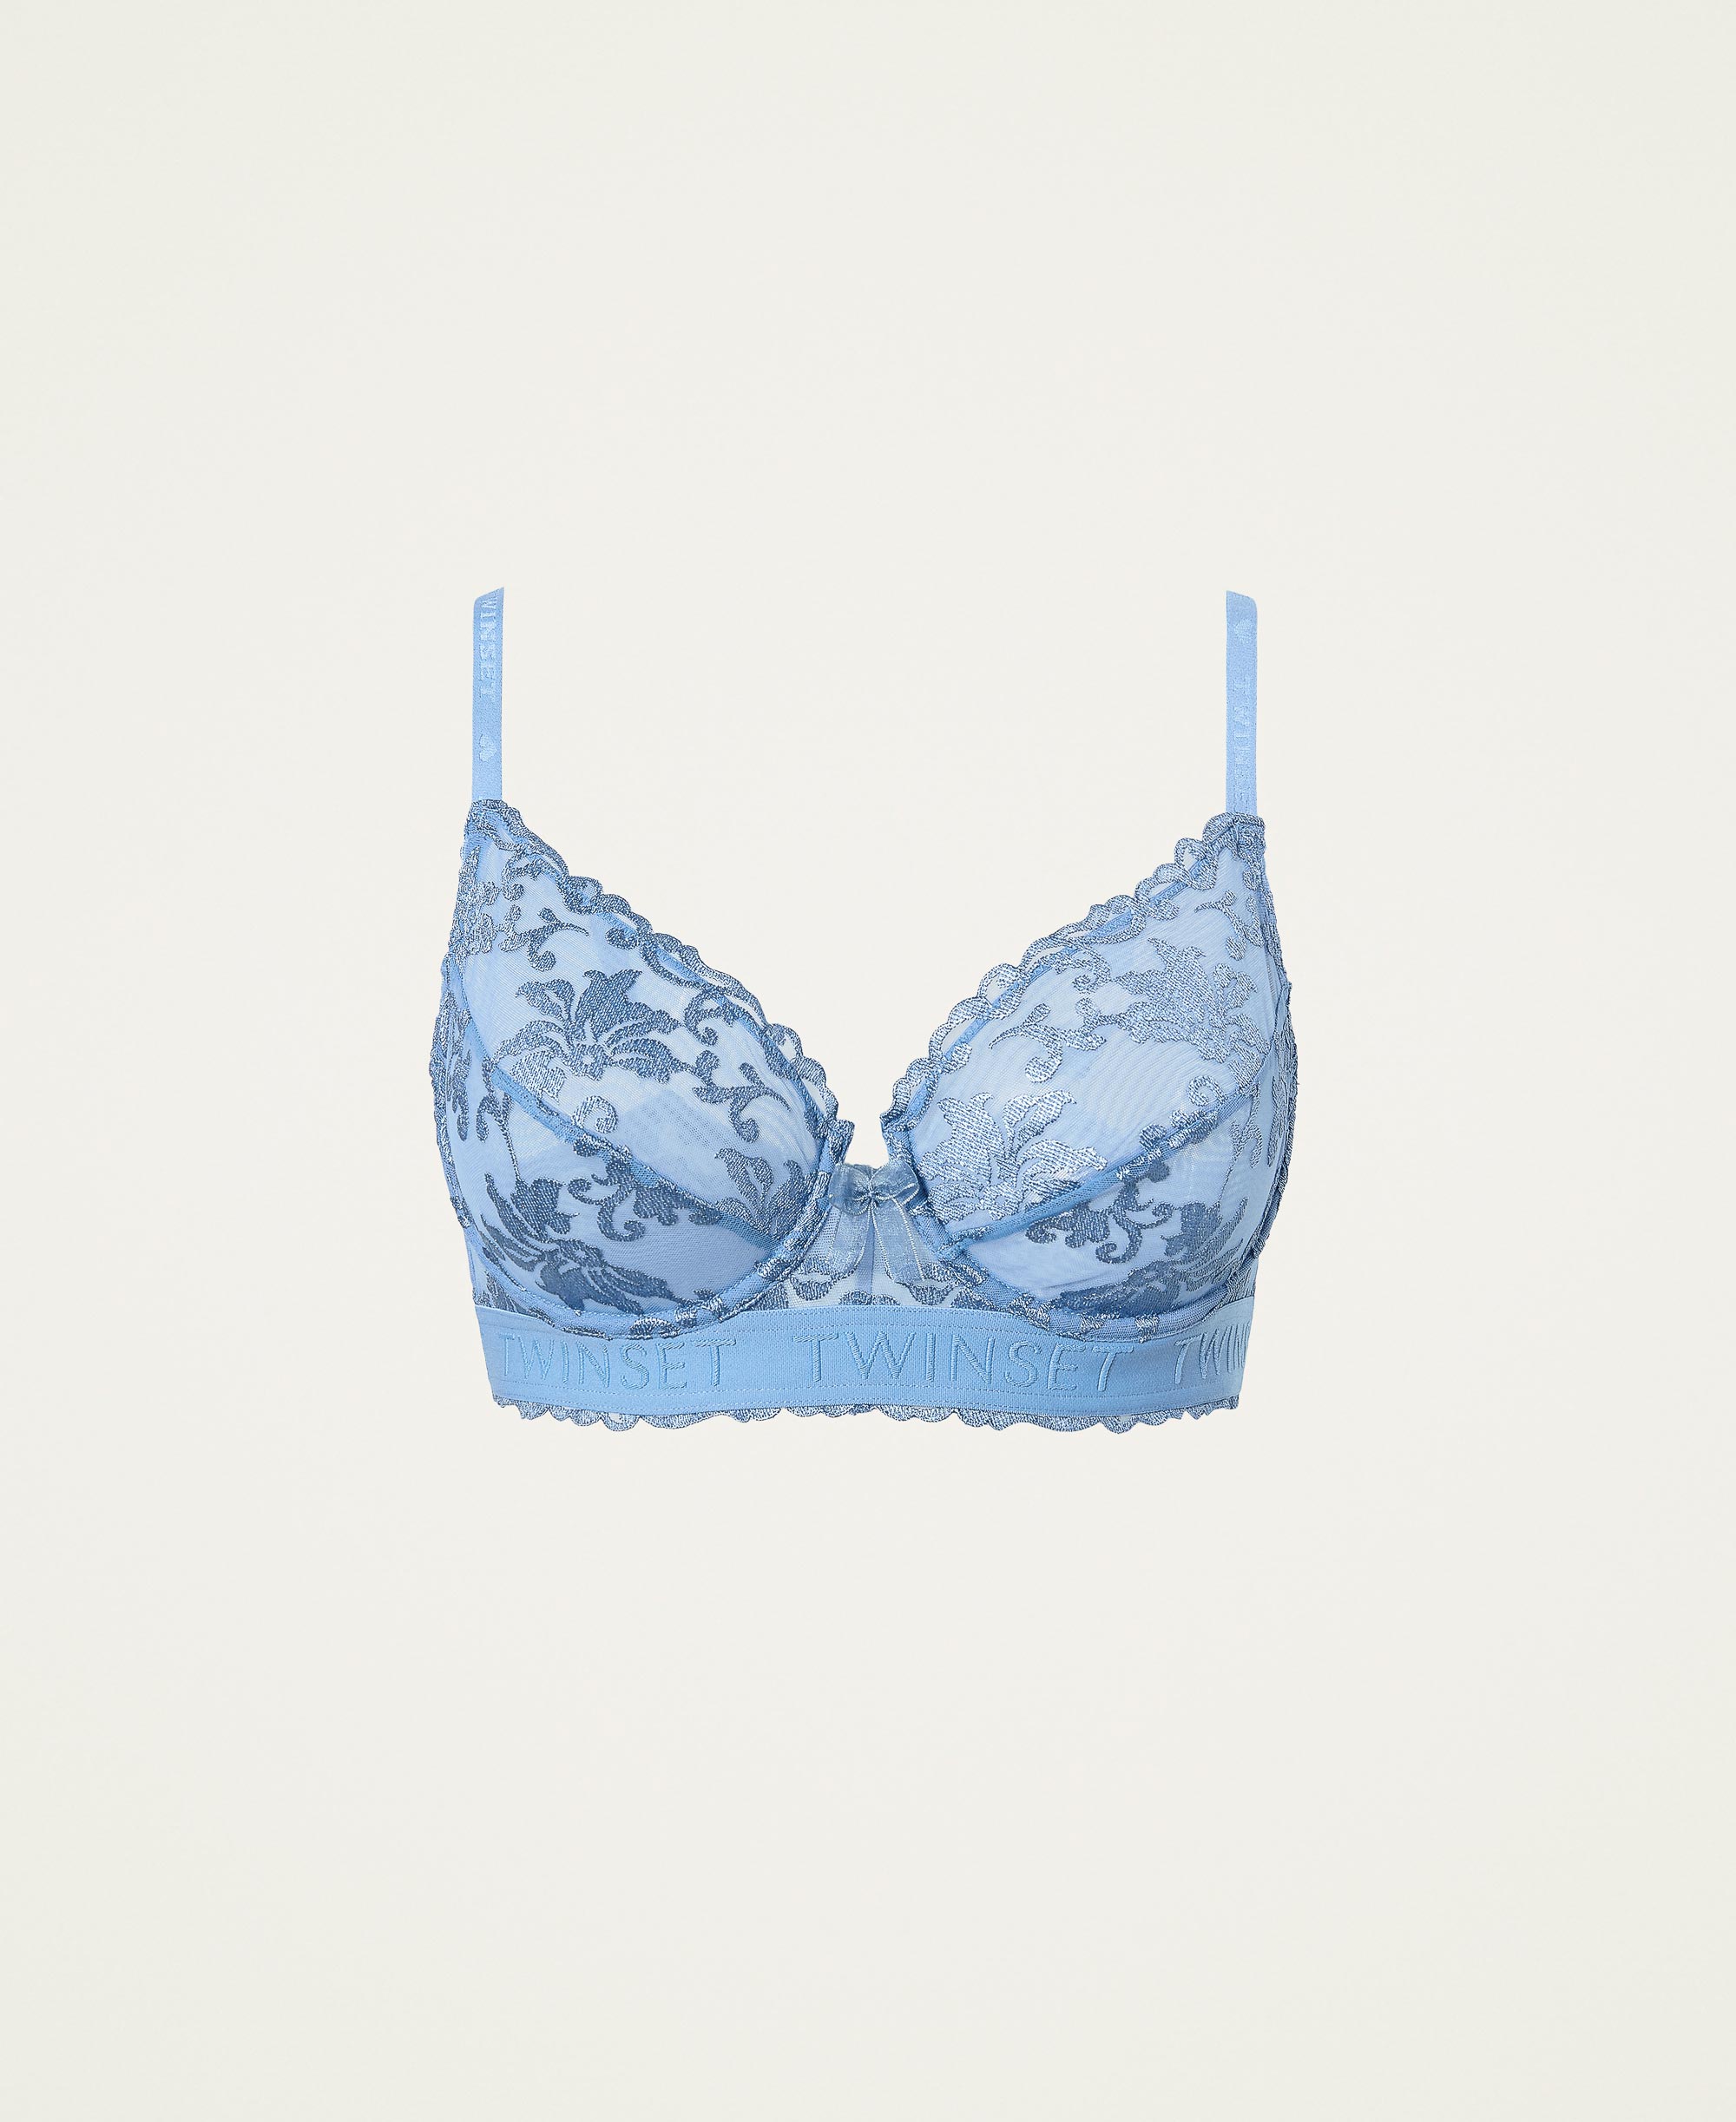 Underwired lace bra Woman, Blue | TWINSET Milano